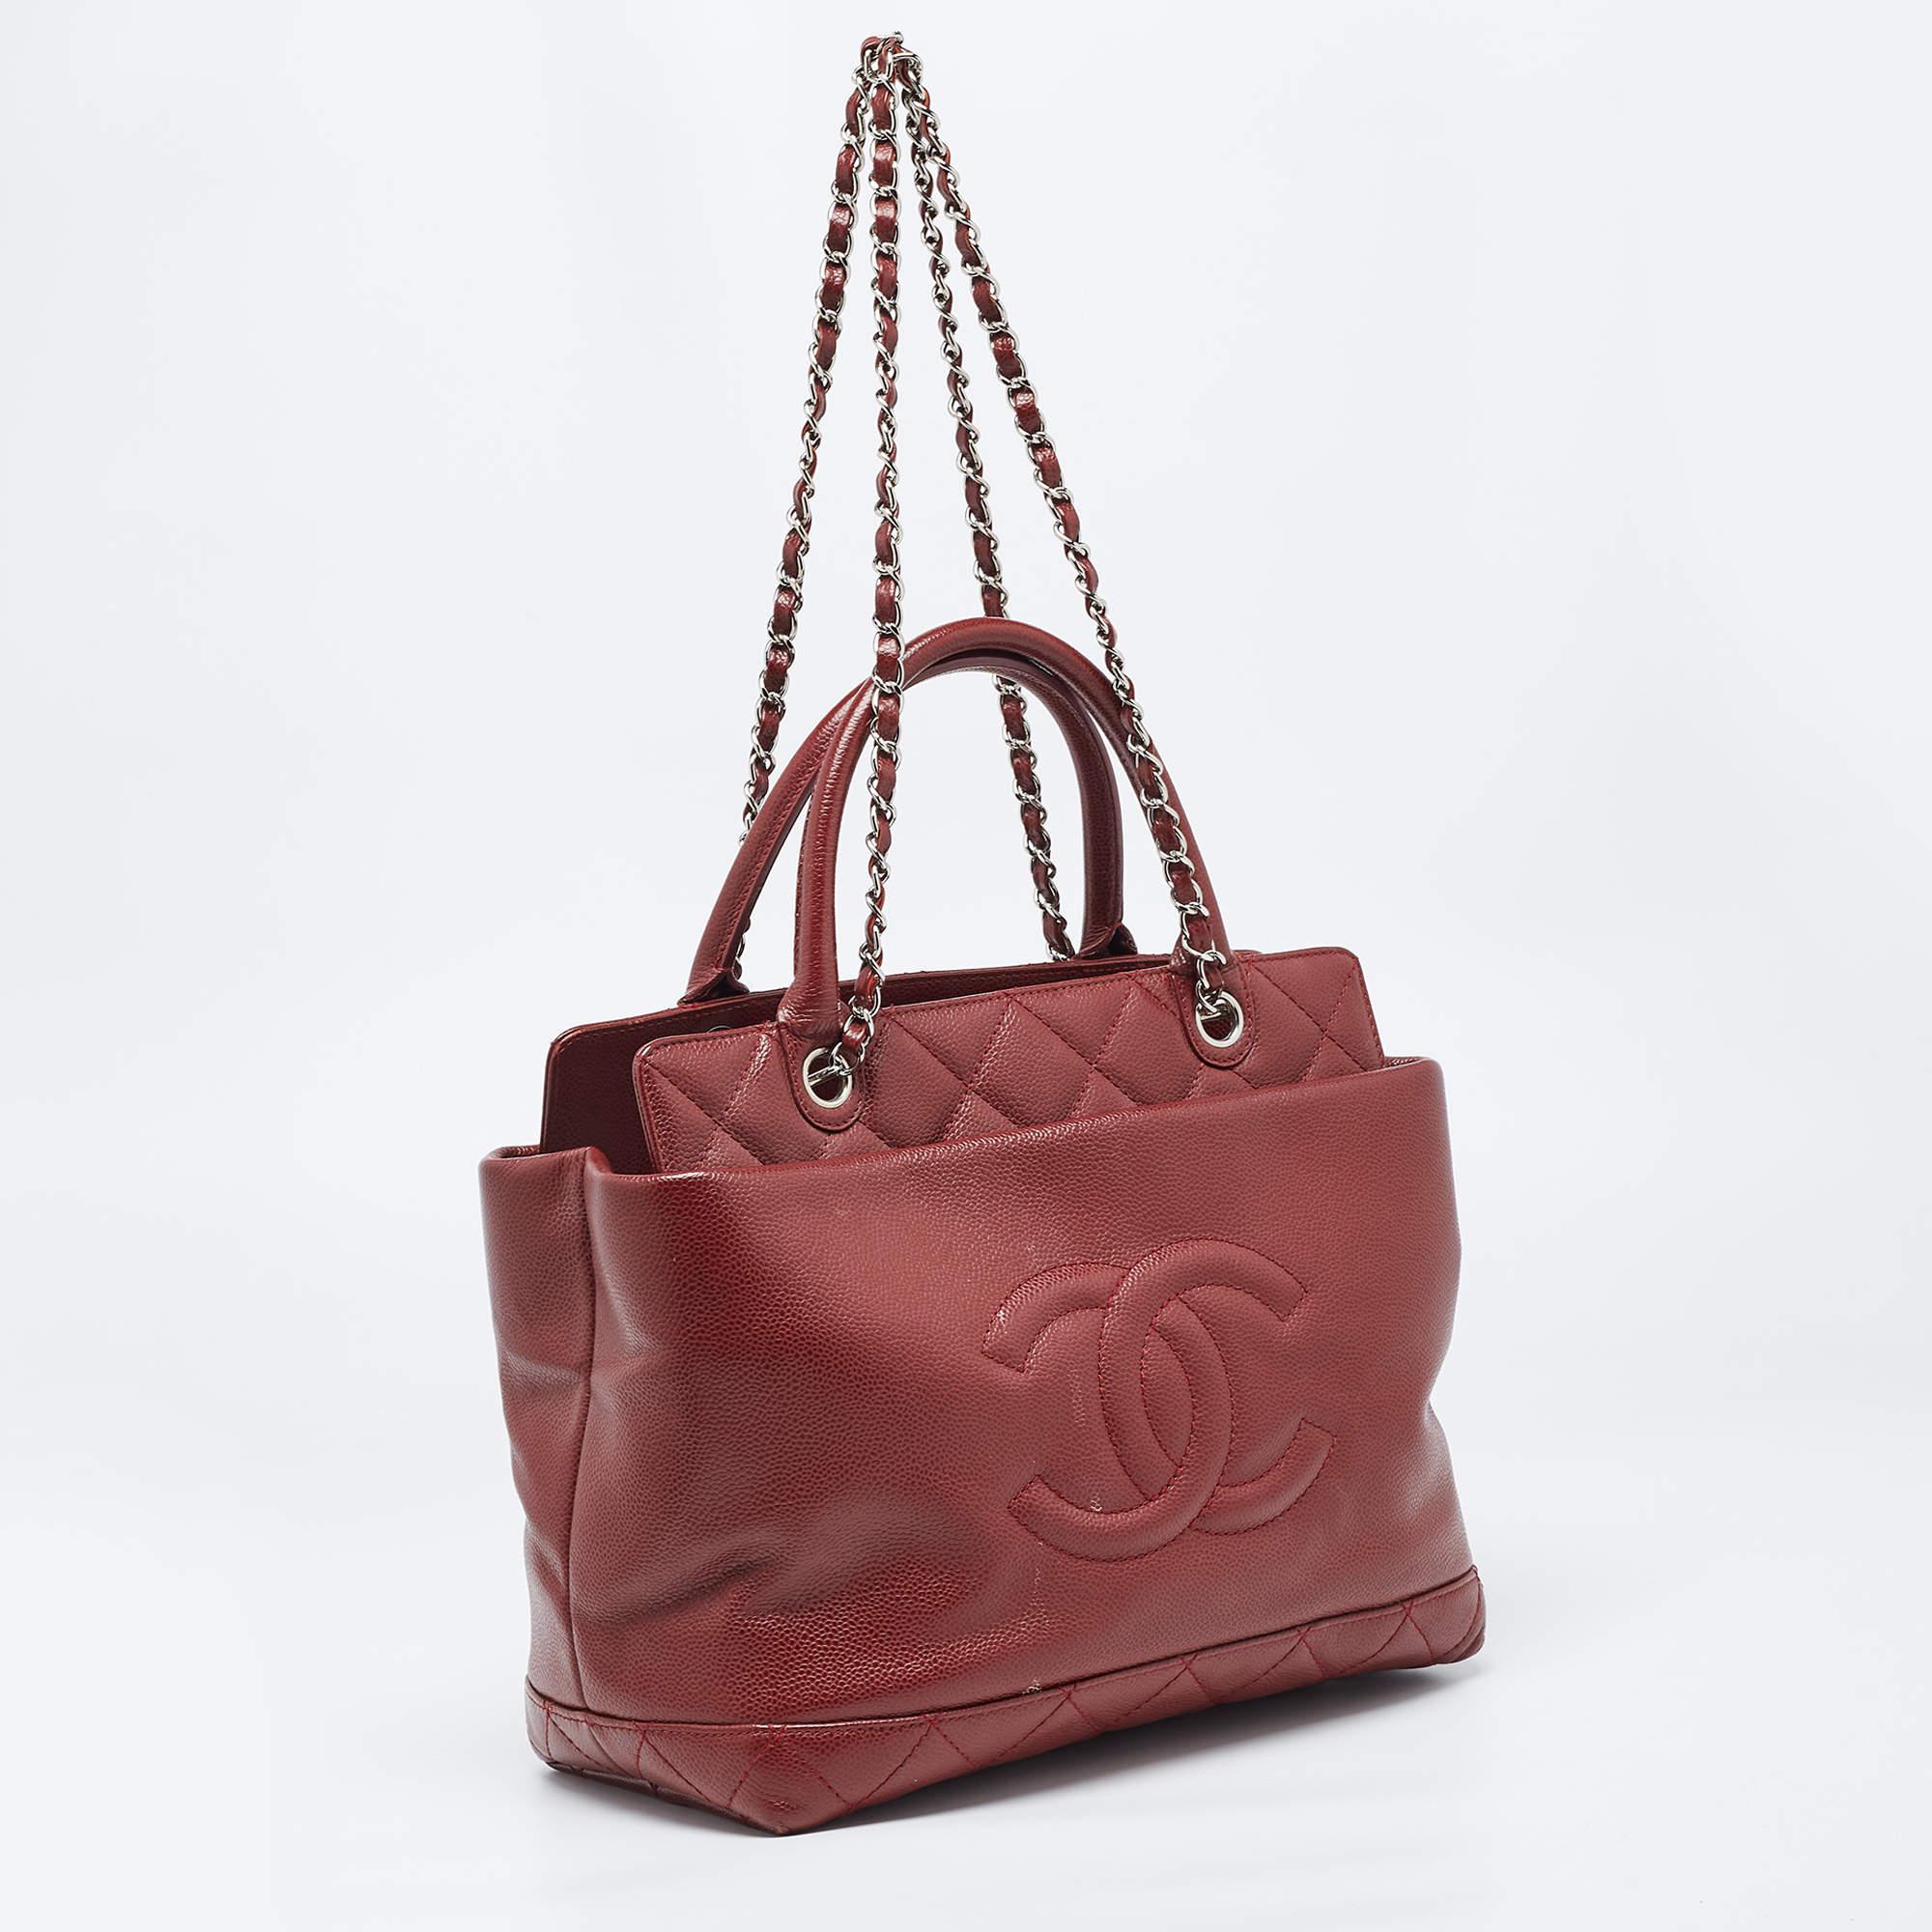 This alluring tote bag for women has been designed to assist you on any day. Convenient to carry and fashionably designed, the tote is cut with skill and sewn into a great shape. It is well-equipped to be a reliable accessory.


